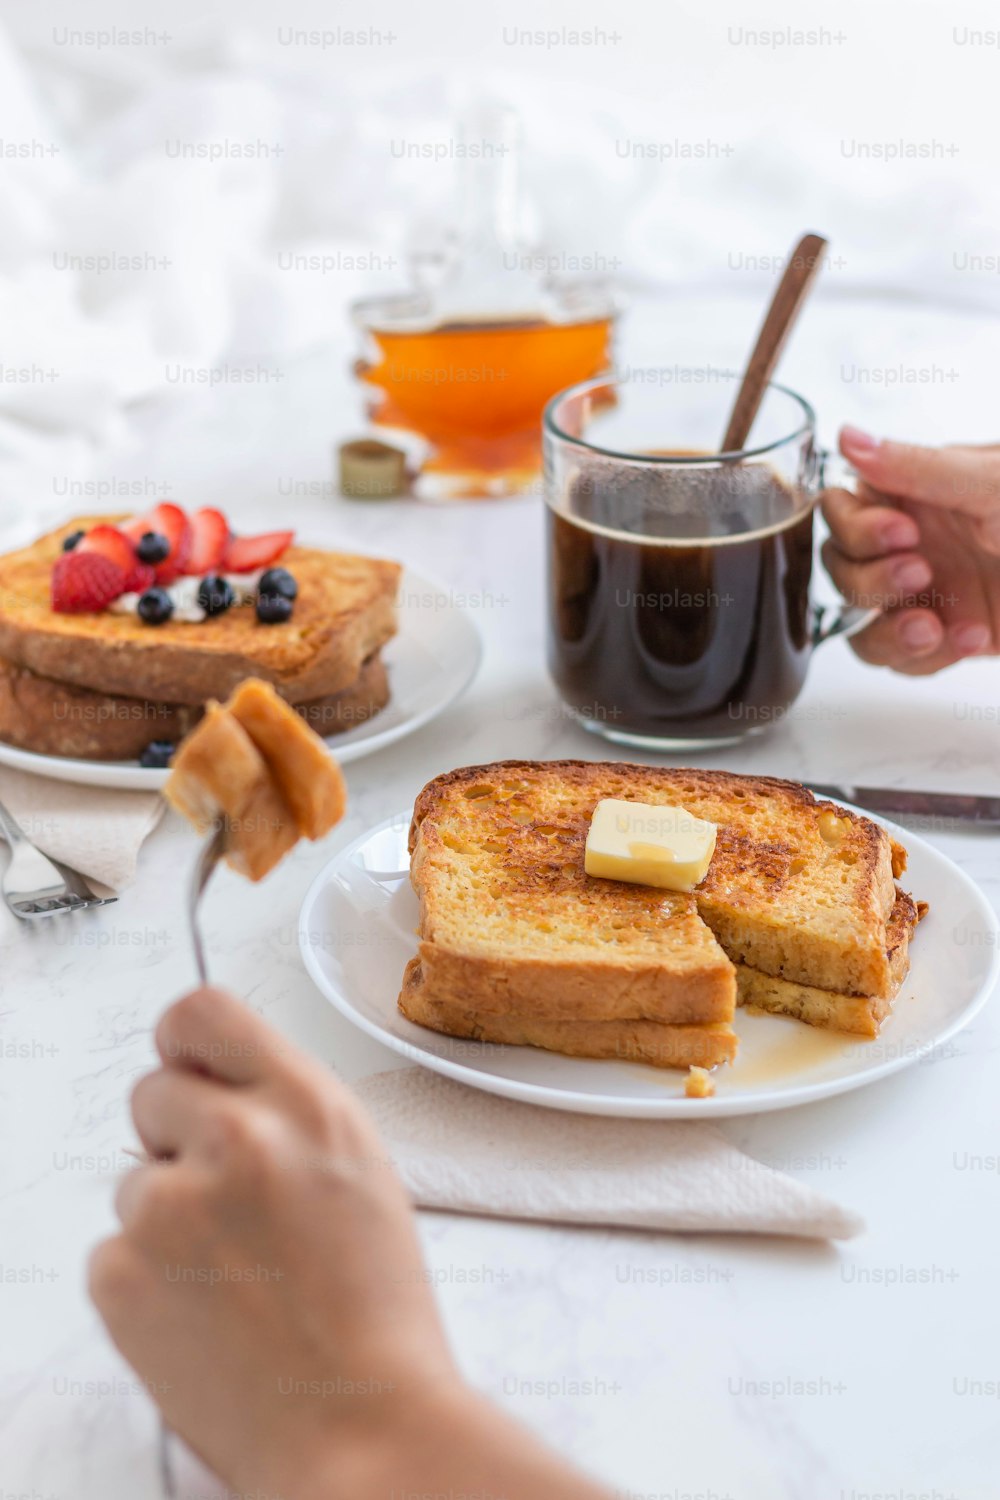 a person holding a spoon over a plate of french toast